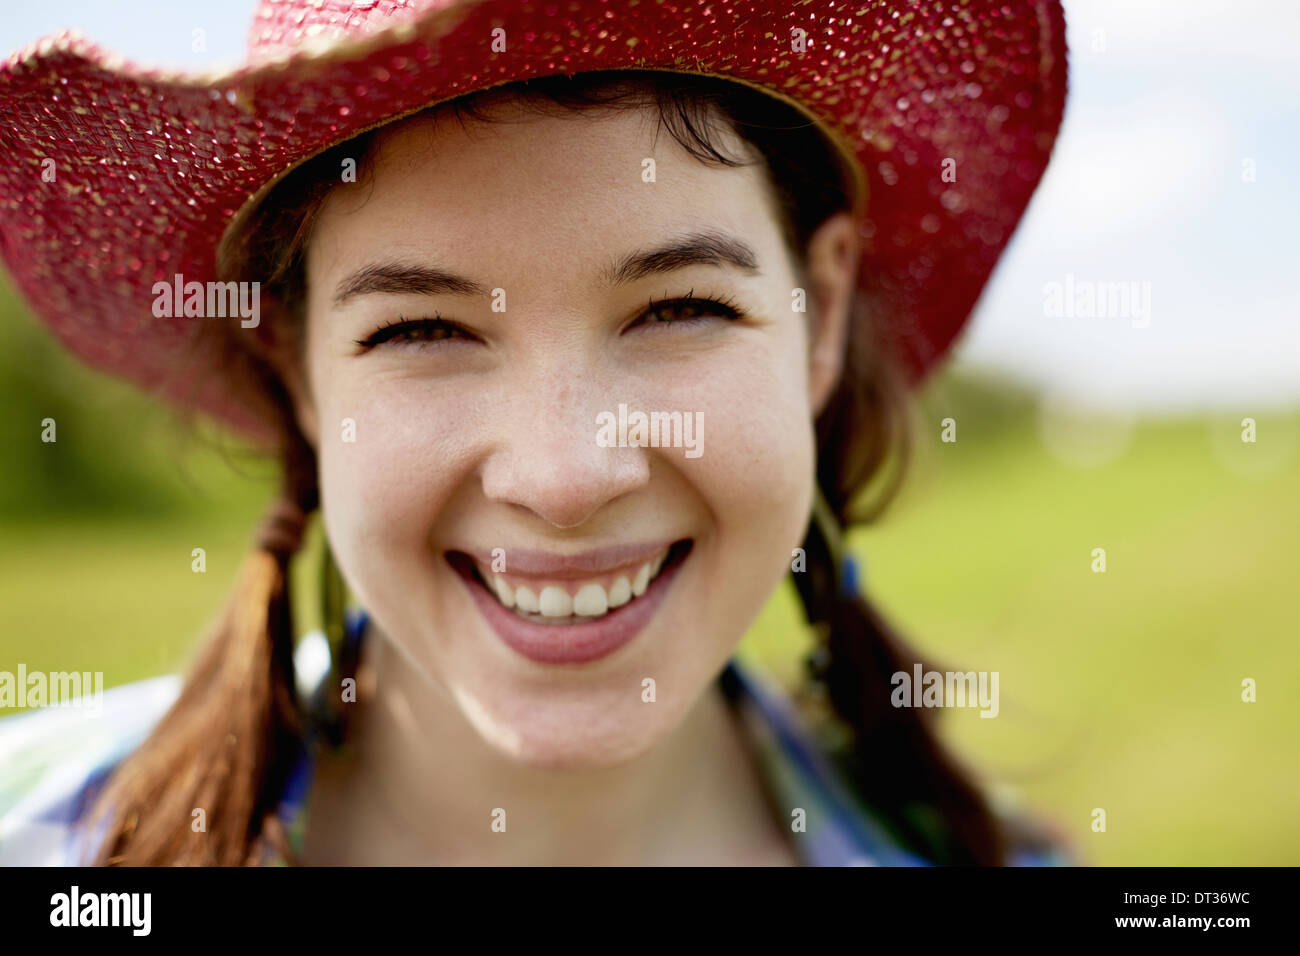 A young woman in a pink straw hat smiling broadly Stock Photo